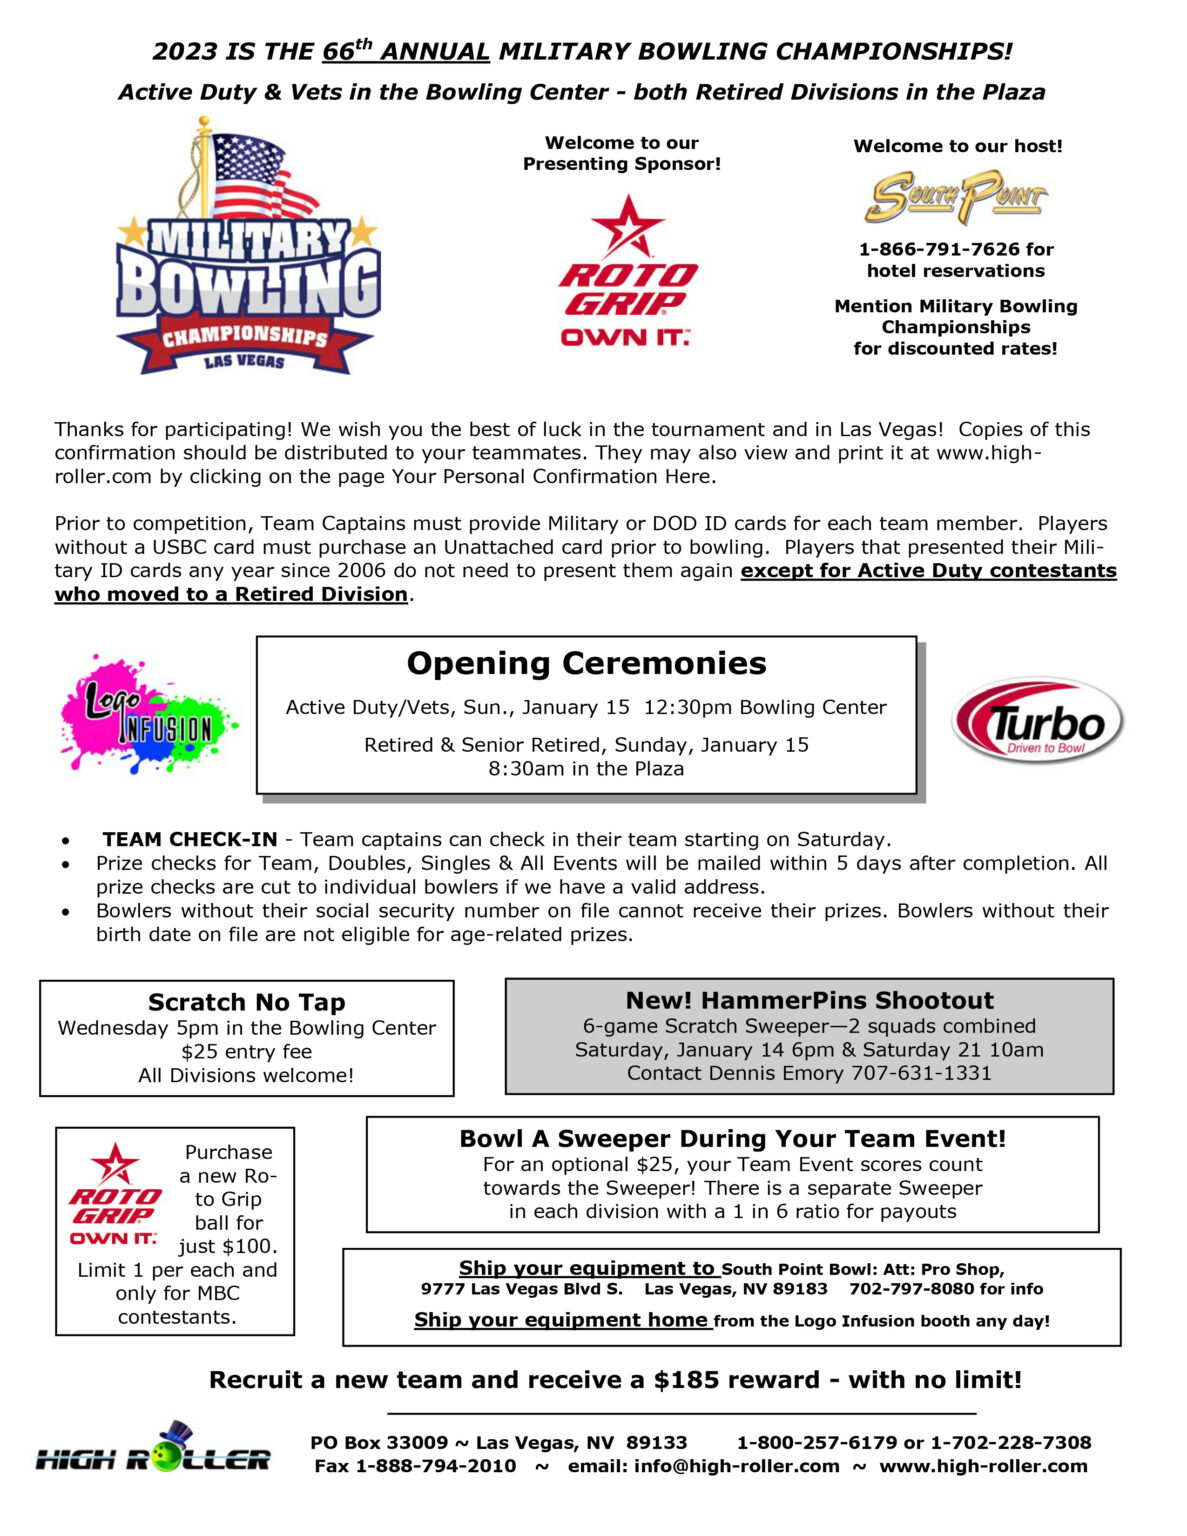 January Military Bowling Championships Info to High Roller